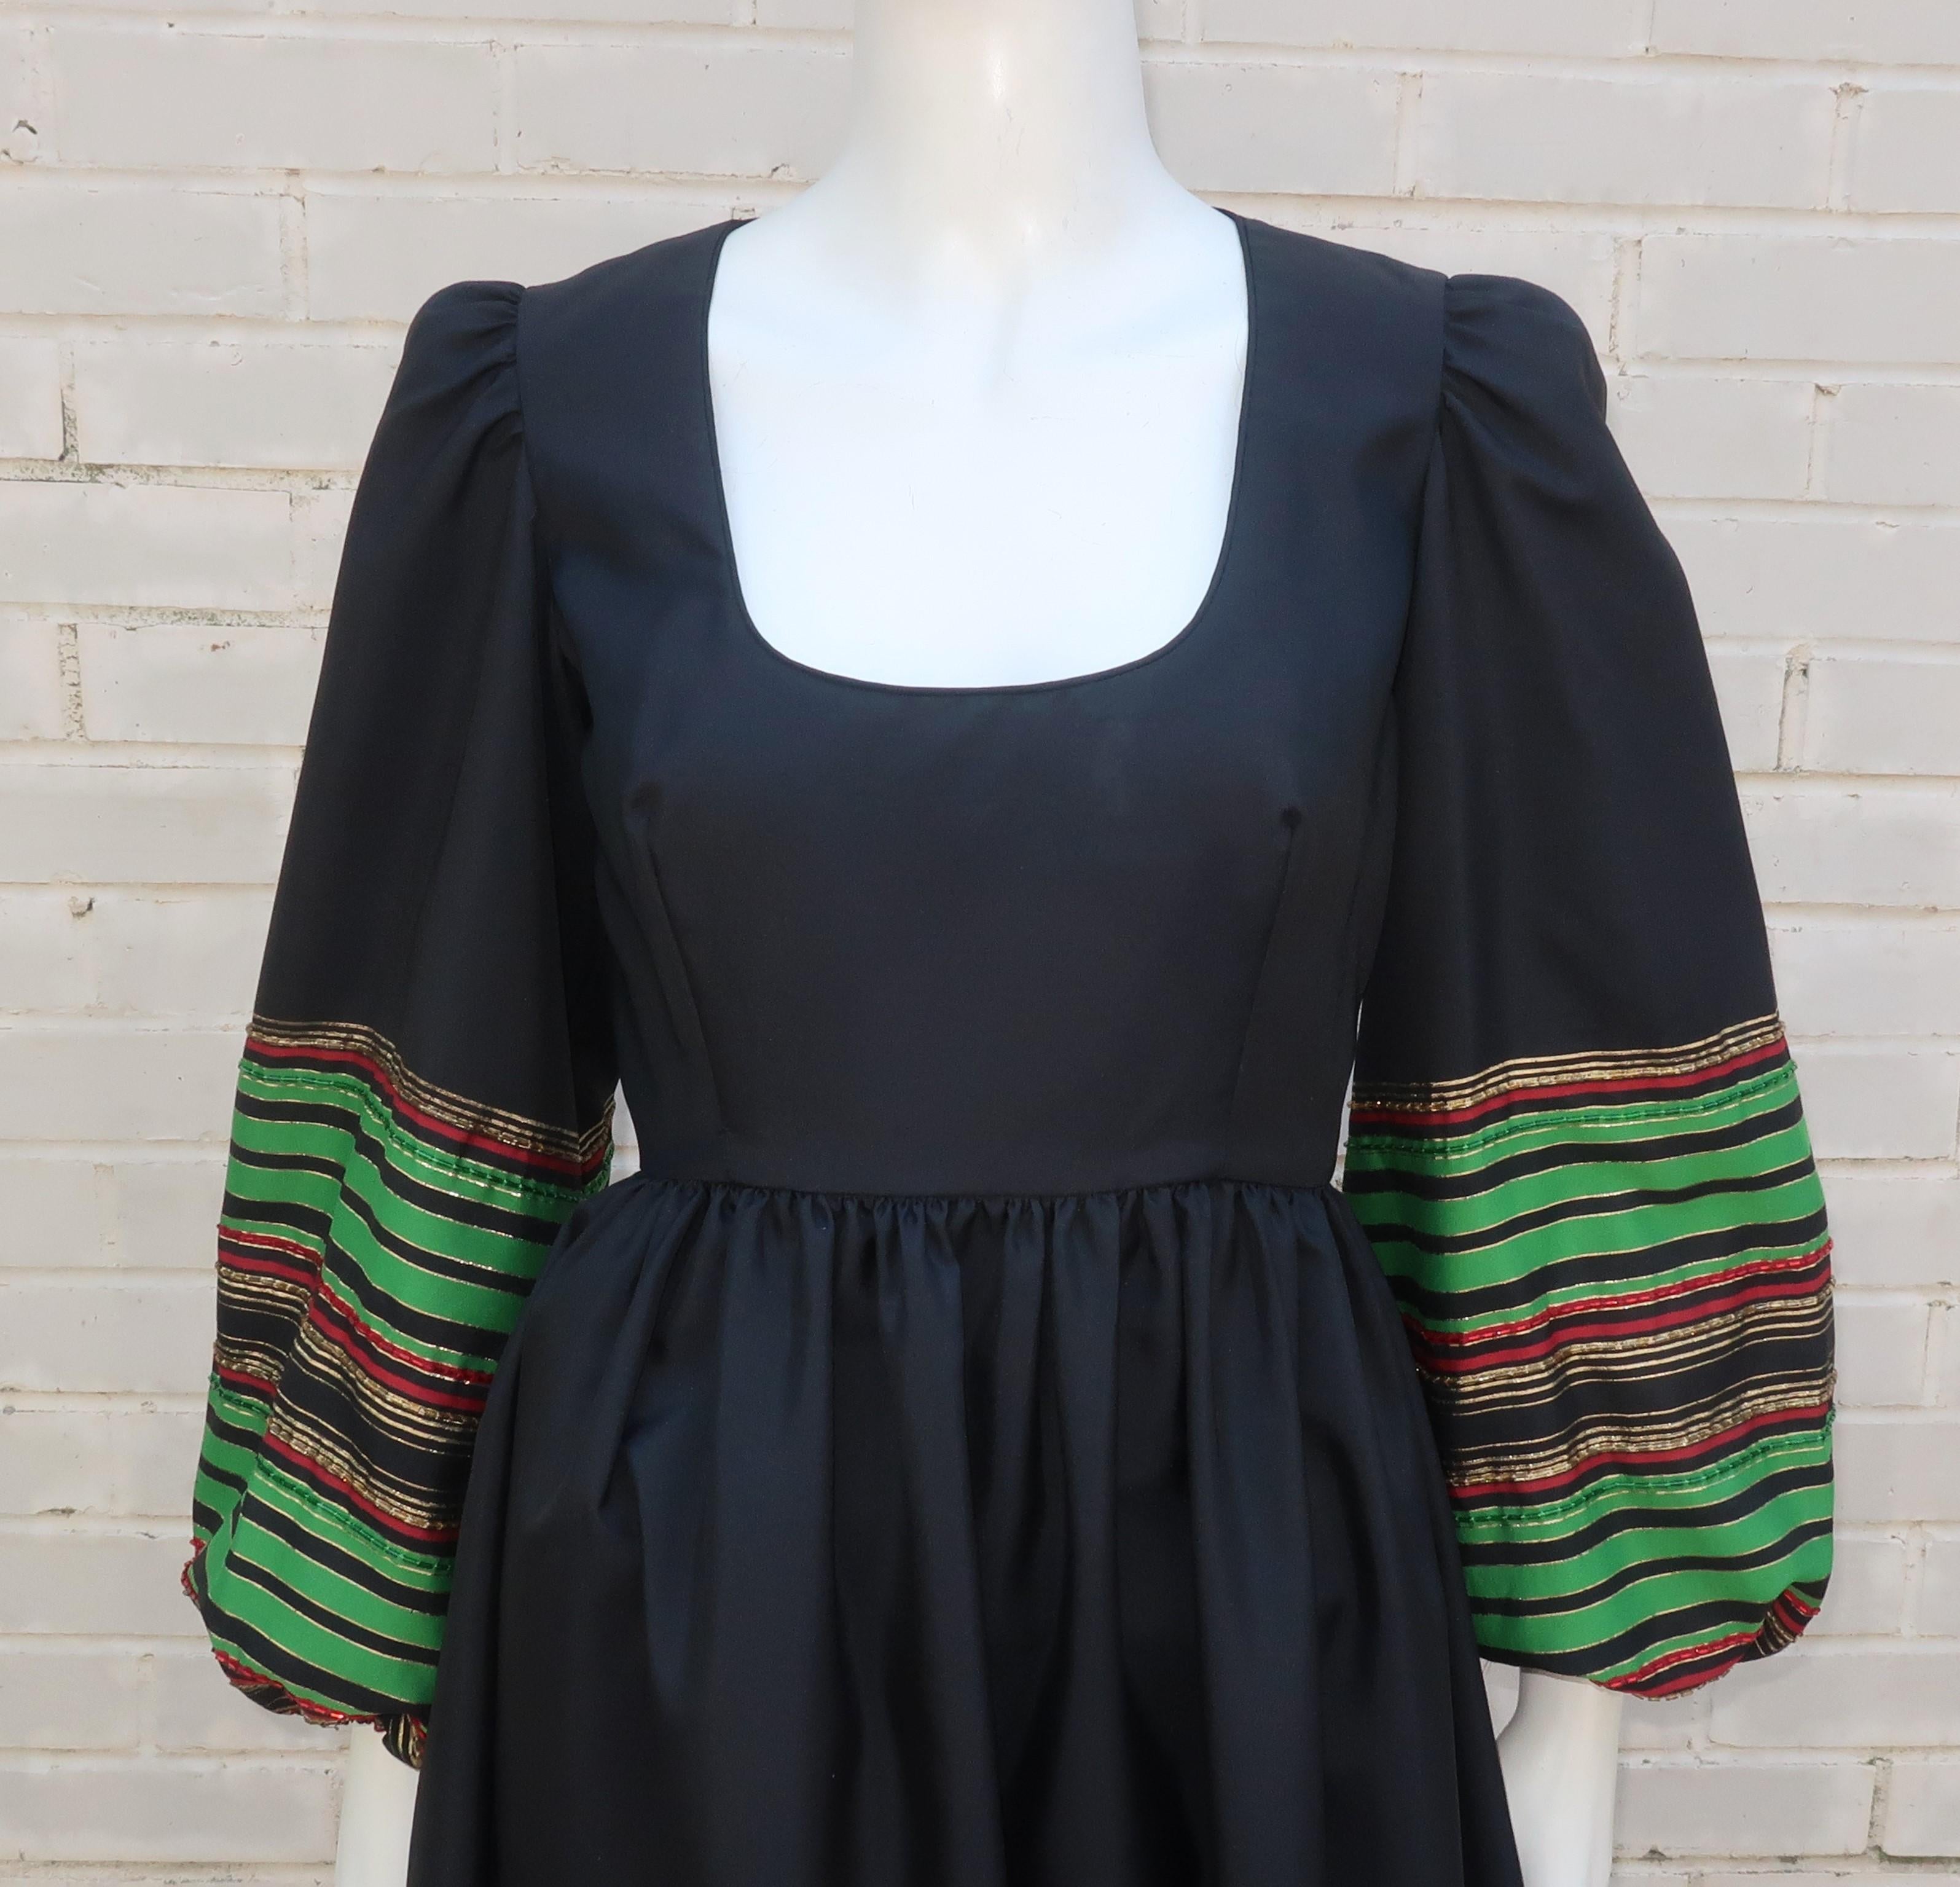 1970's Victoria Royal black matte taffeta maxi dress with beaded striped cuffs and hem in shades of red, green and gold lamé.  The dress zips and hooks at the back with a scoop neckline, side pockets and balloon sleeves.  The beads add a sparkle